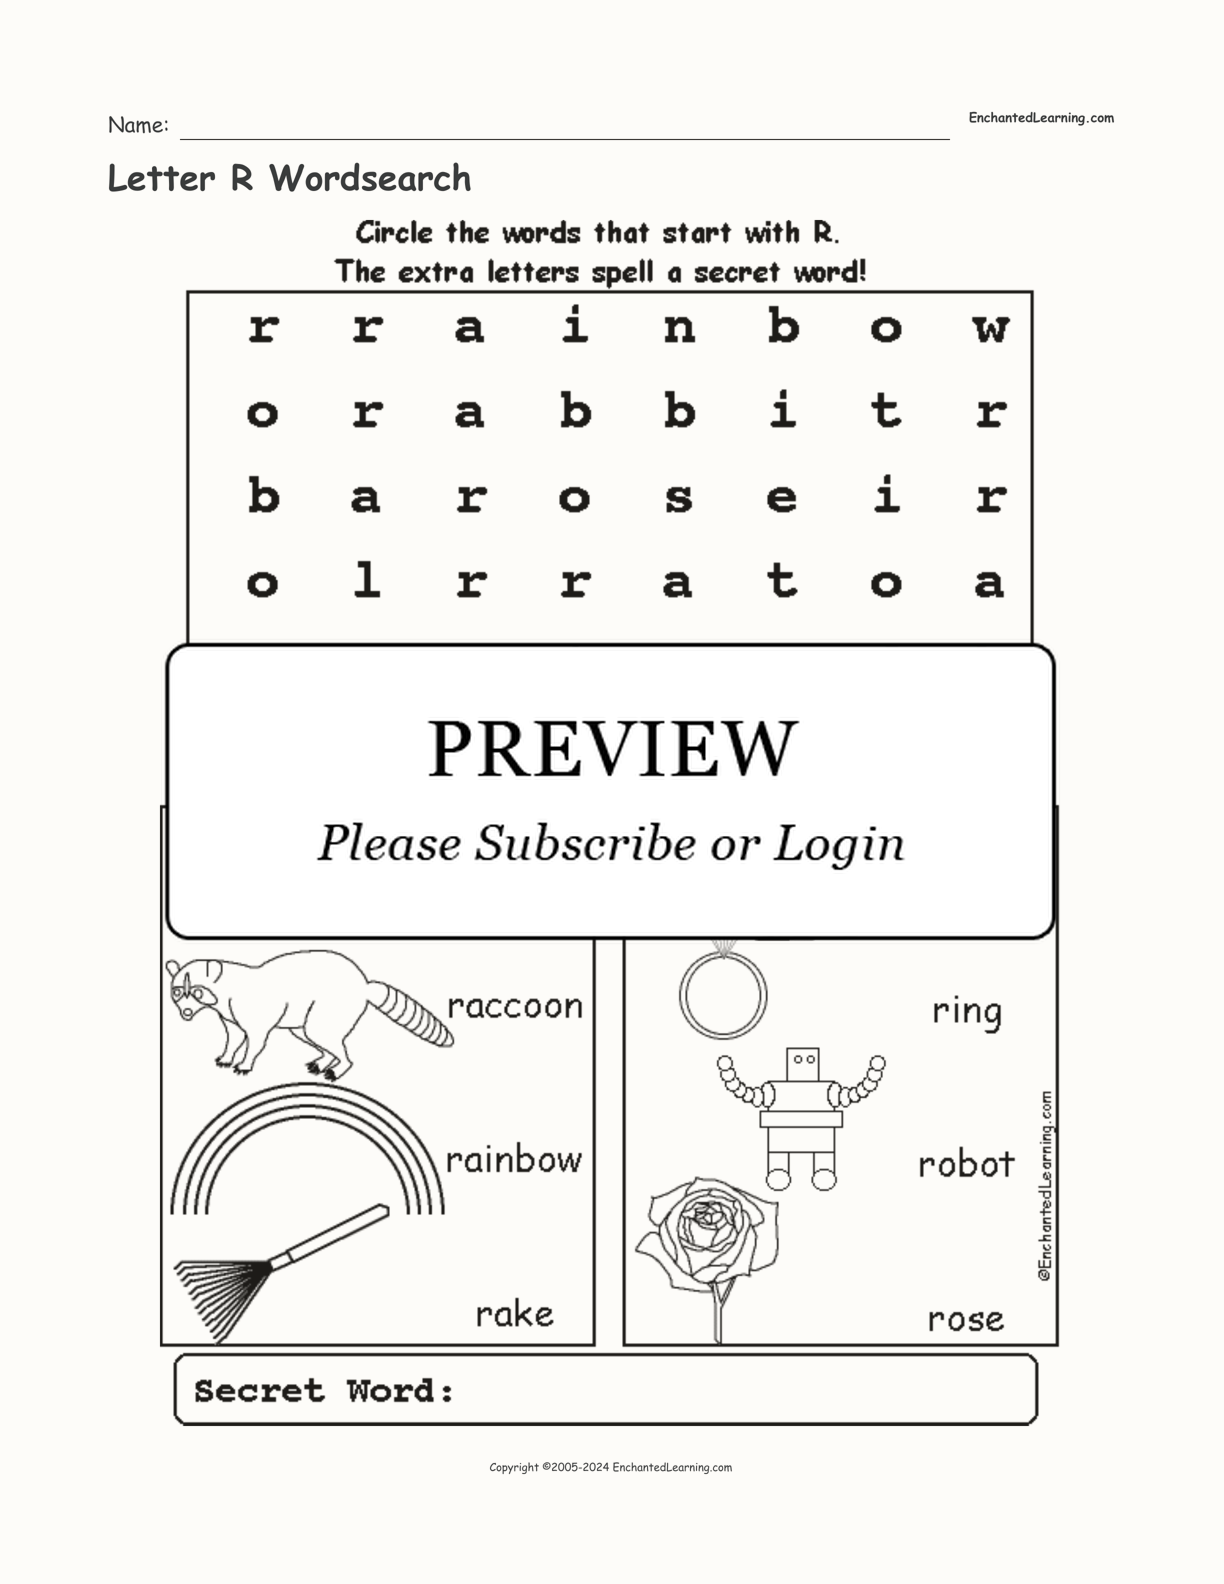 letter-r-wordsearch-enchanted-learning